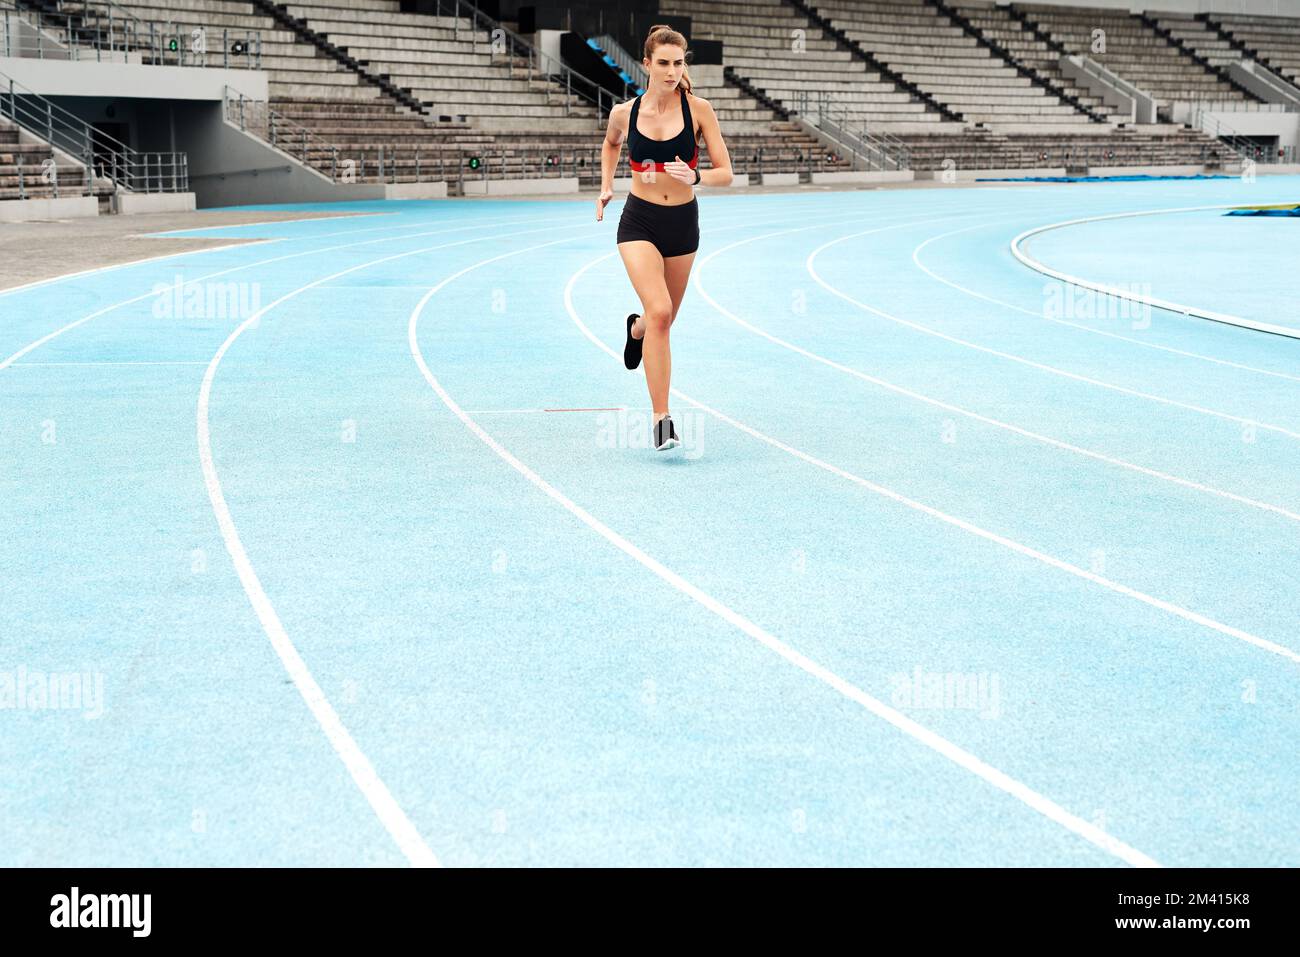 Sometimes all you need is a good, long run. Full length shot of an attractive young athlete running a track field alone during a workout session Stock Photo